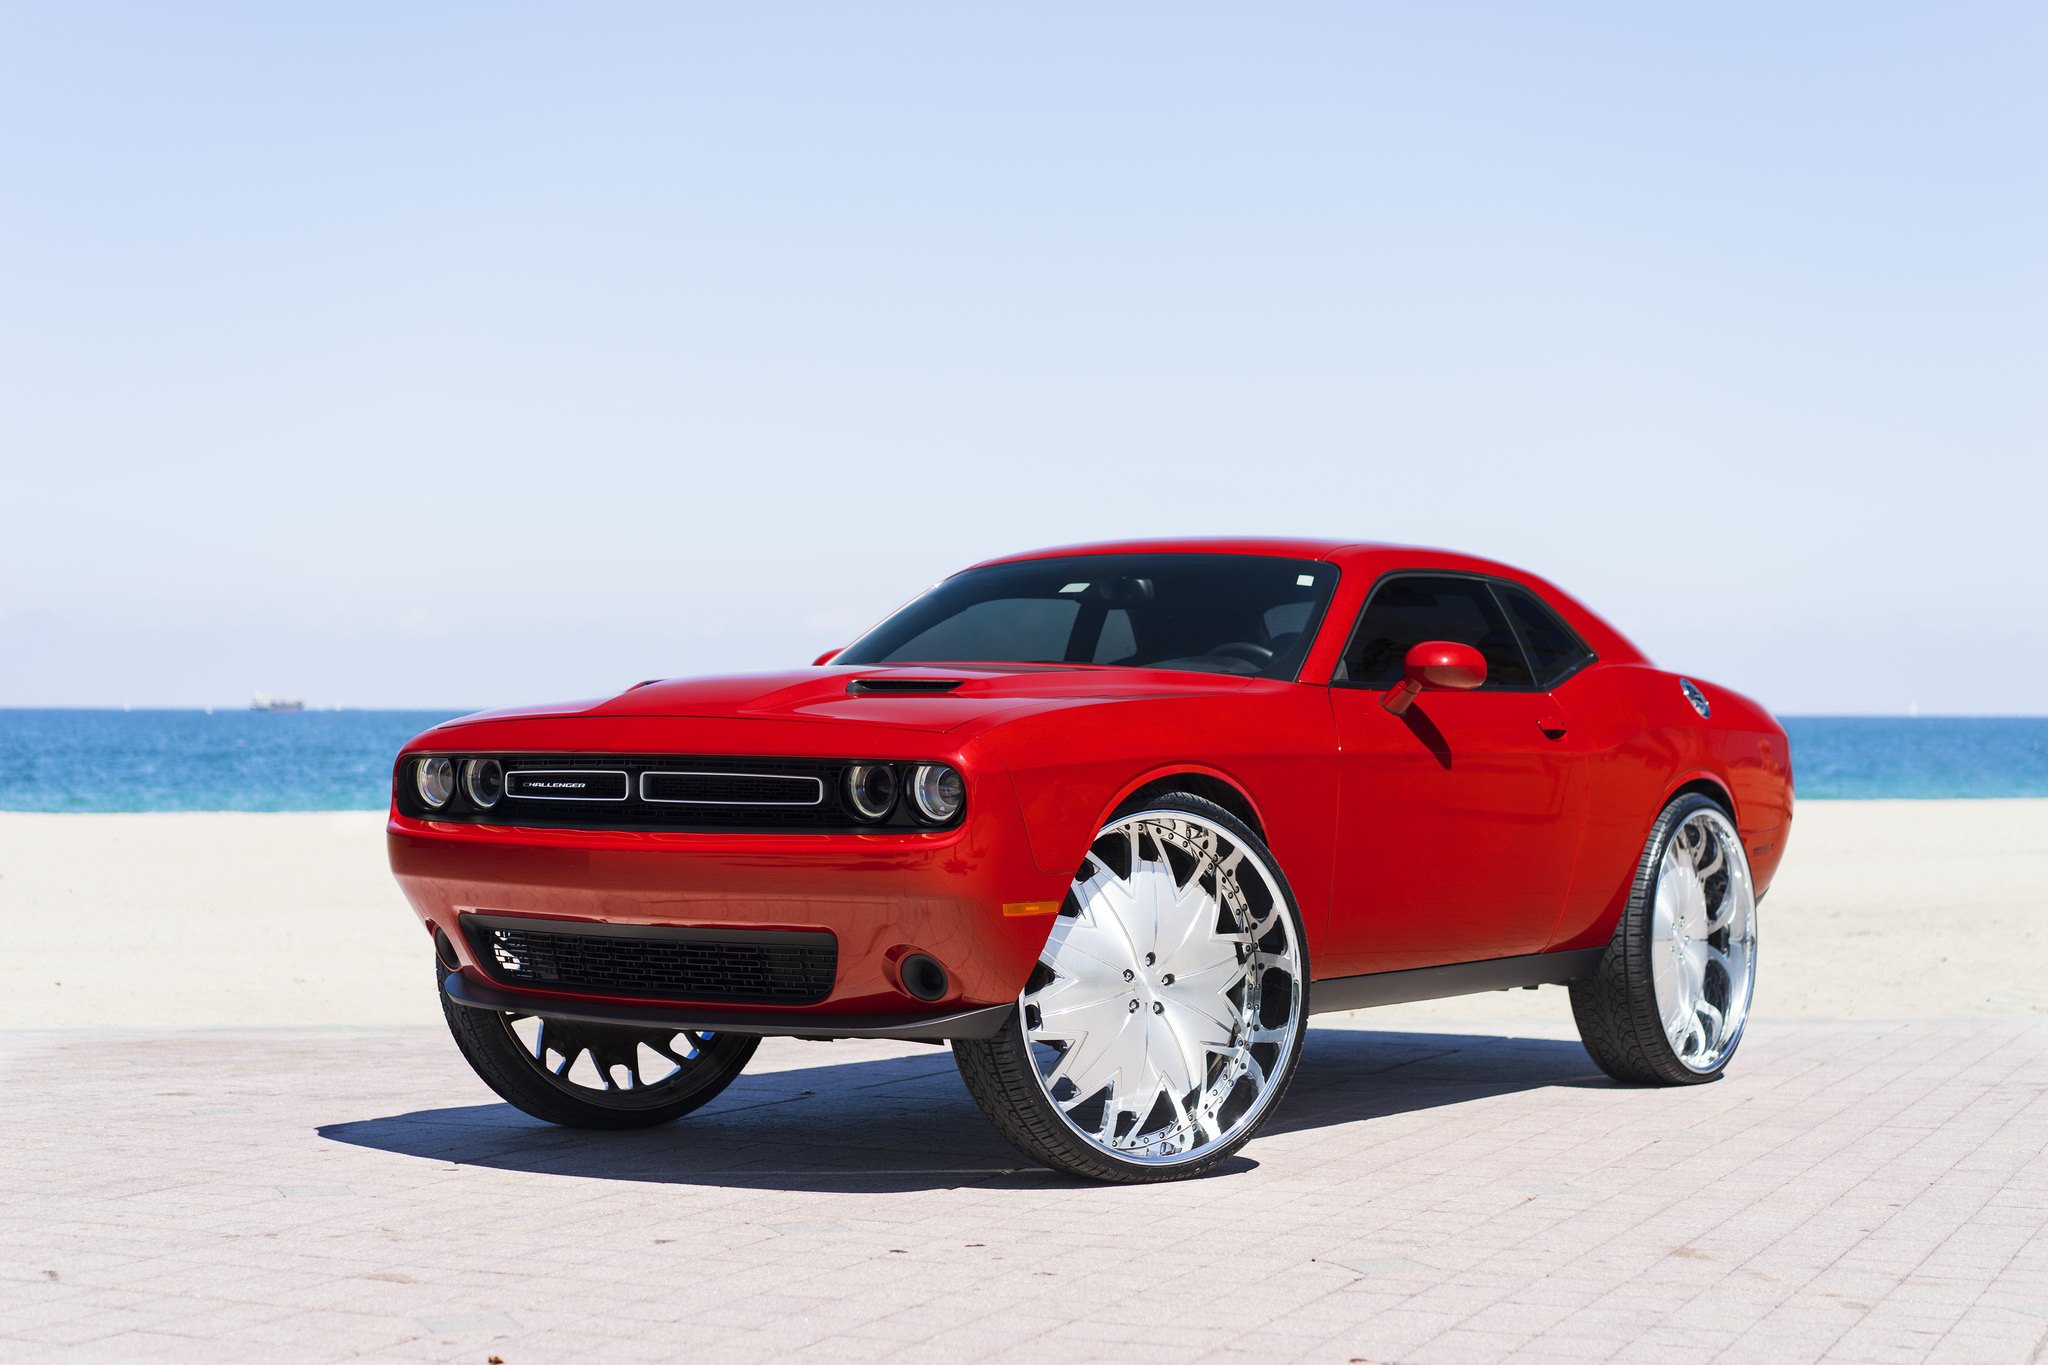 Red Dodge Challenger with Custom Black Bumper Grille - Photo by DUB